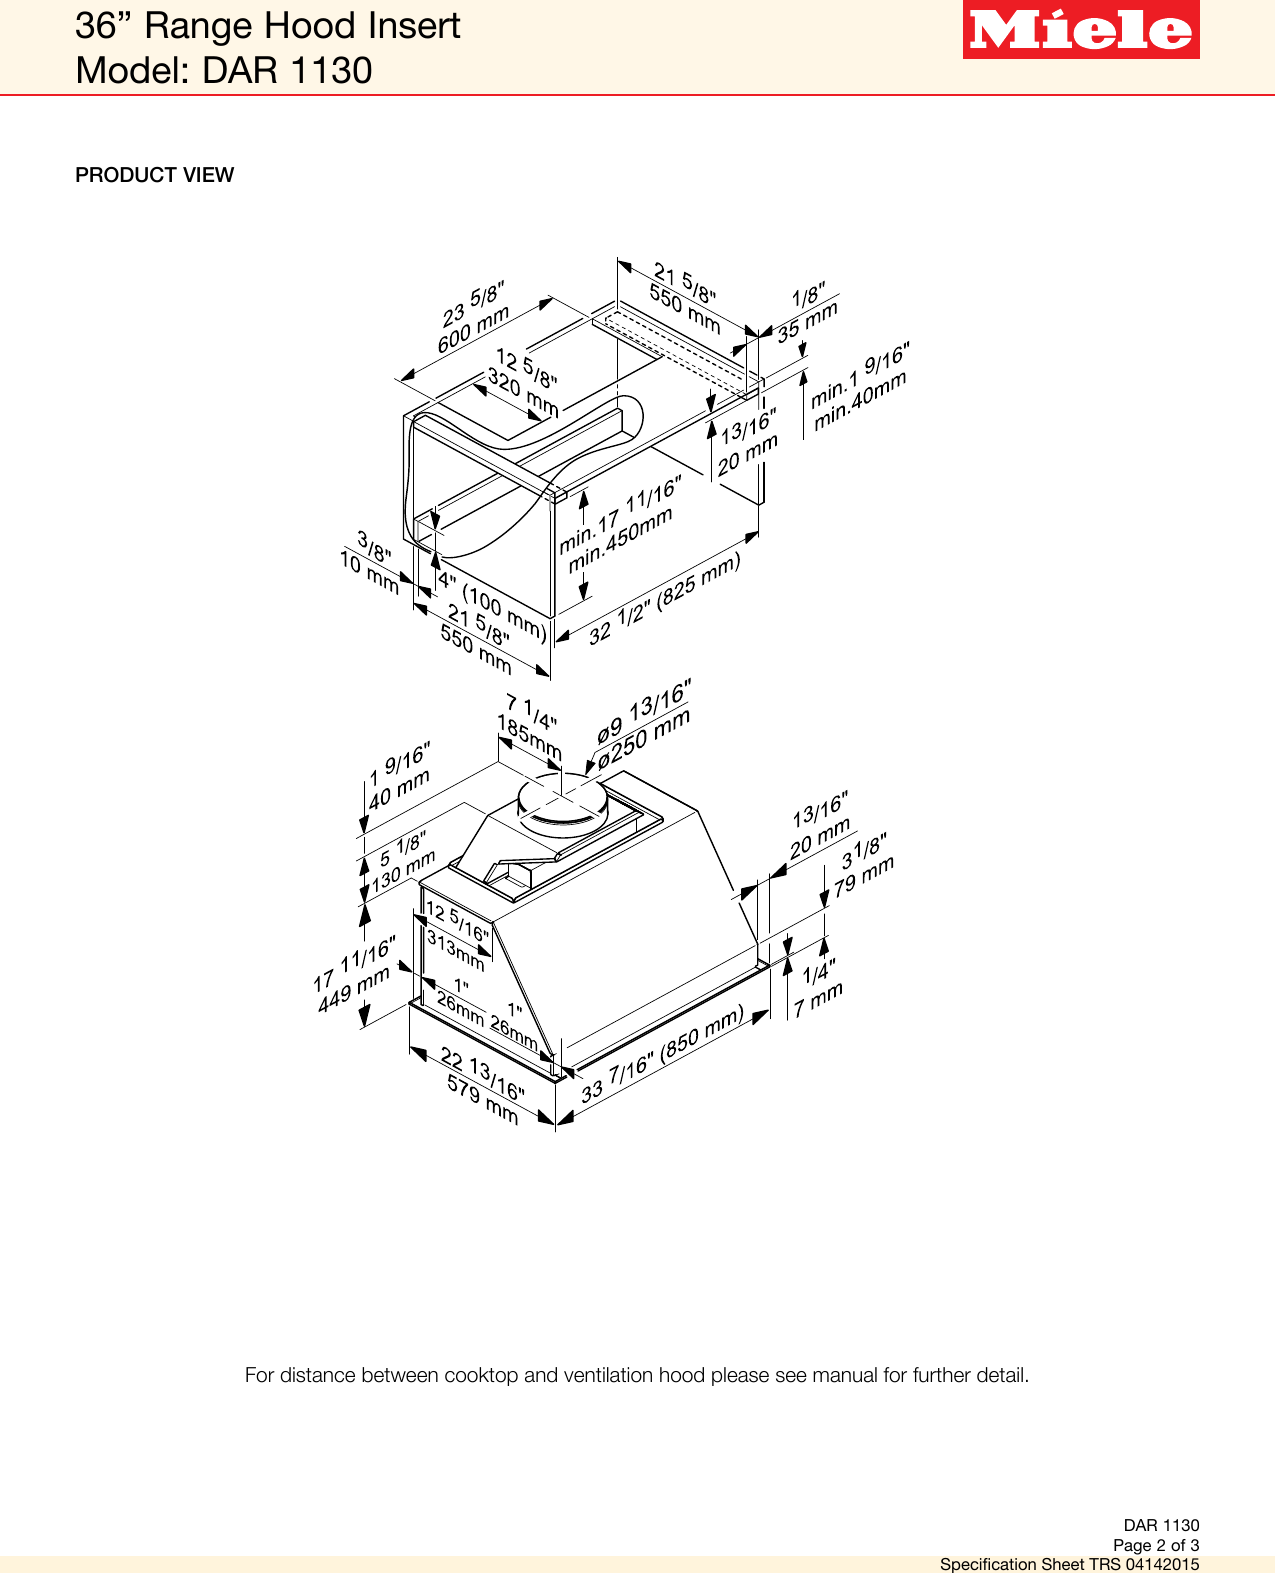 Page 2 of 3 - Miele Miele-Dar-1130-Specification-Sheet-  Miele-dar-1130-specification-sheet